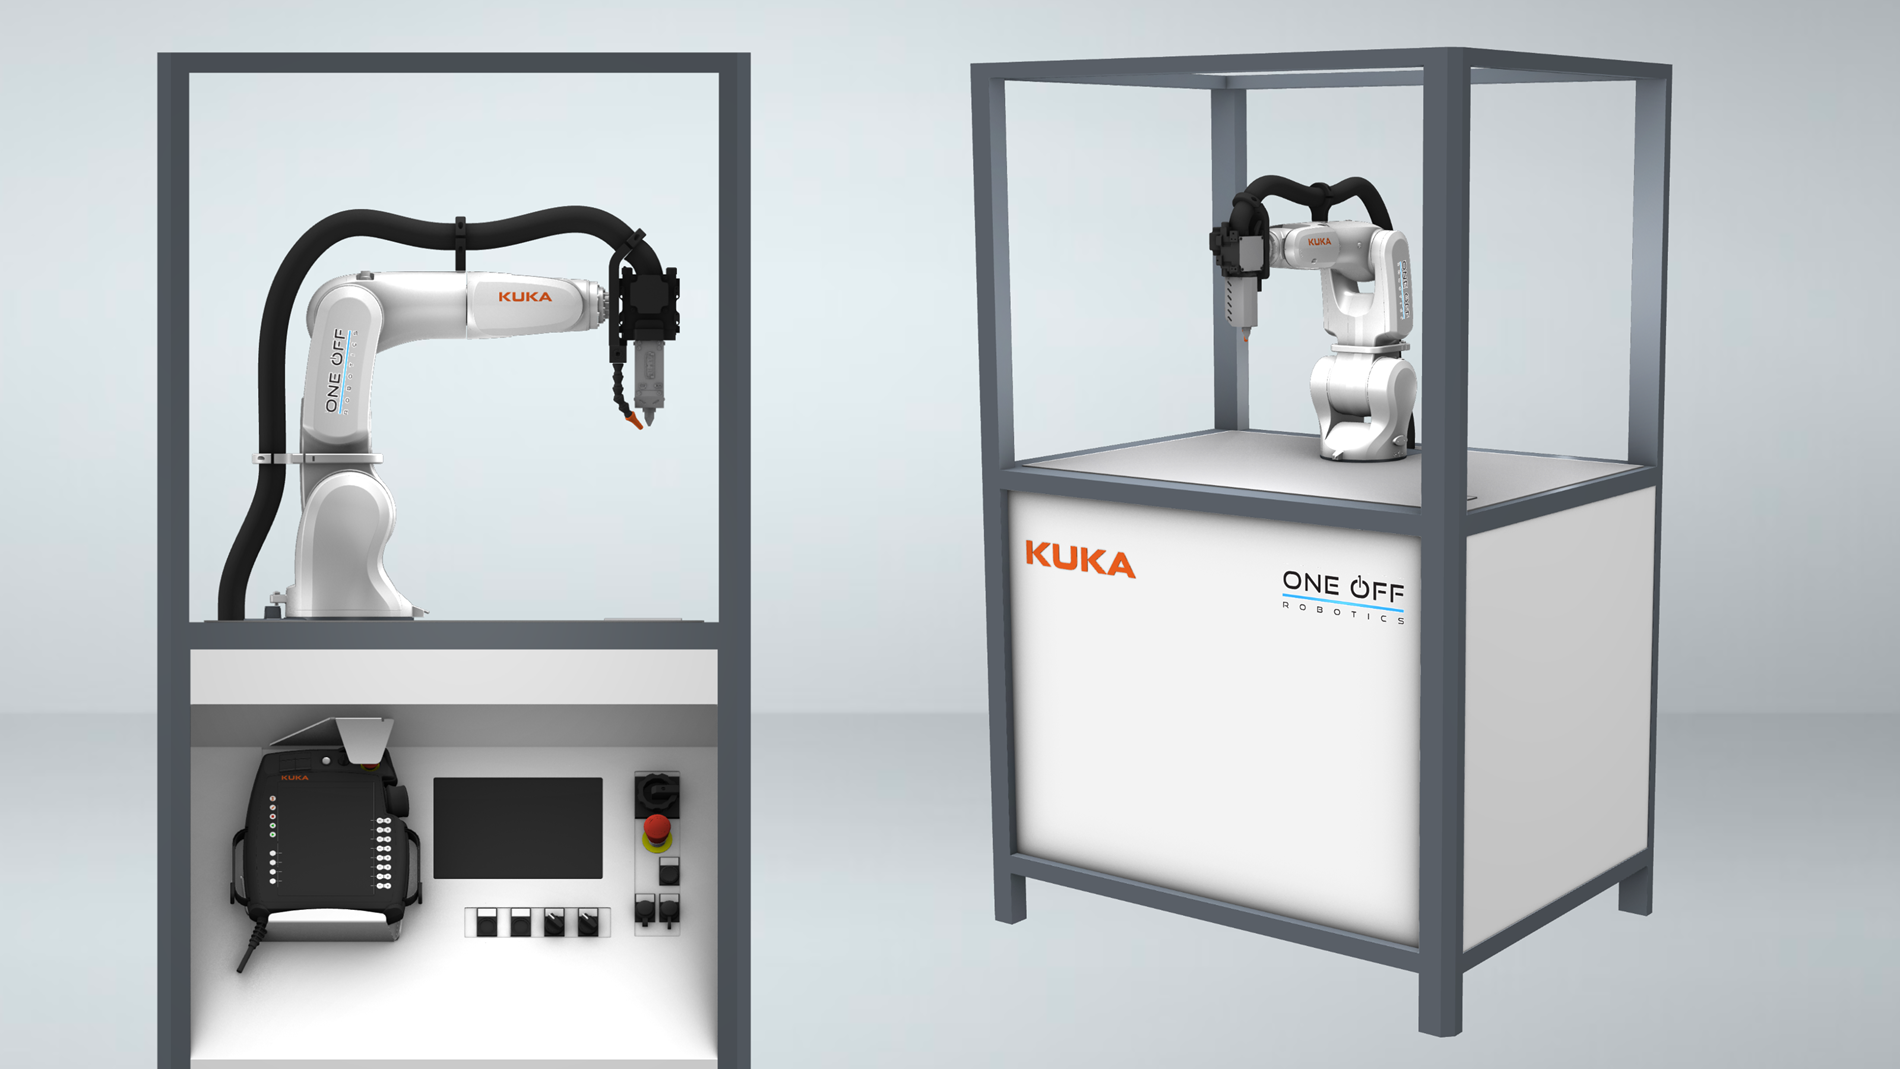 Robotic Education Cell for 3D Printing